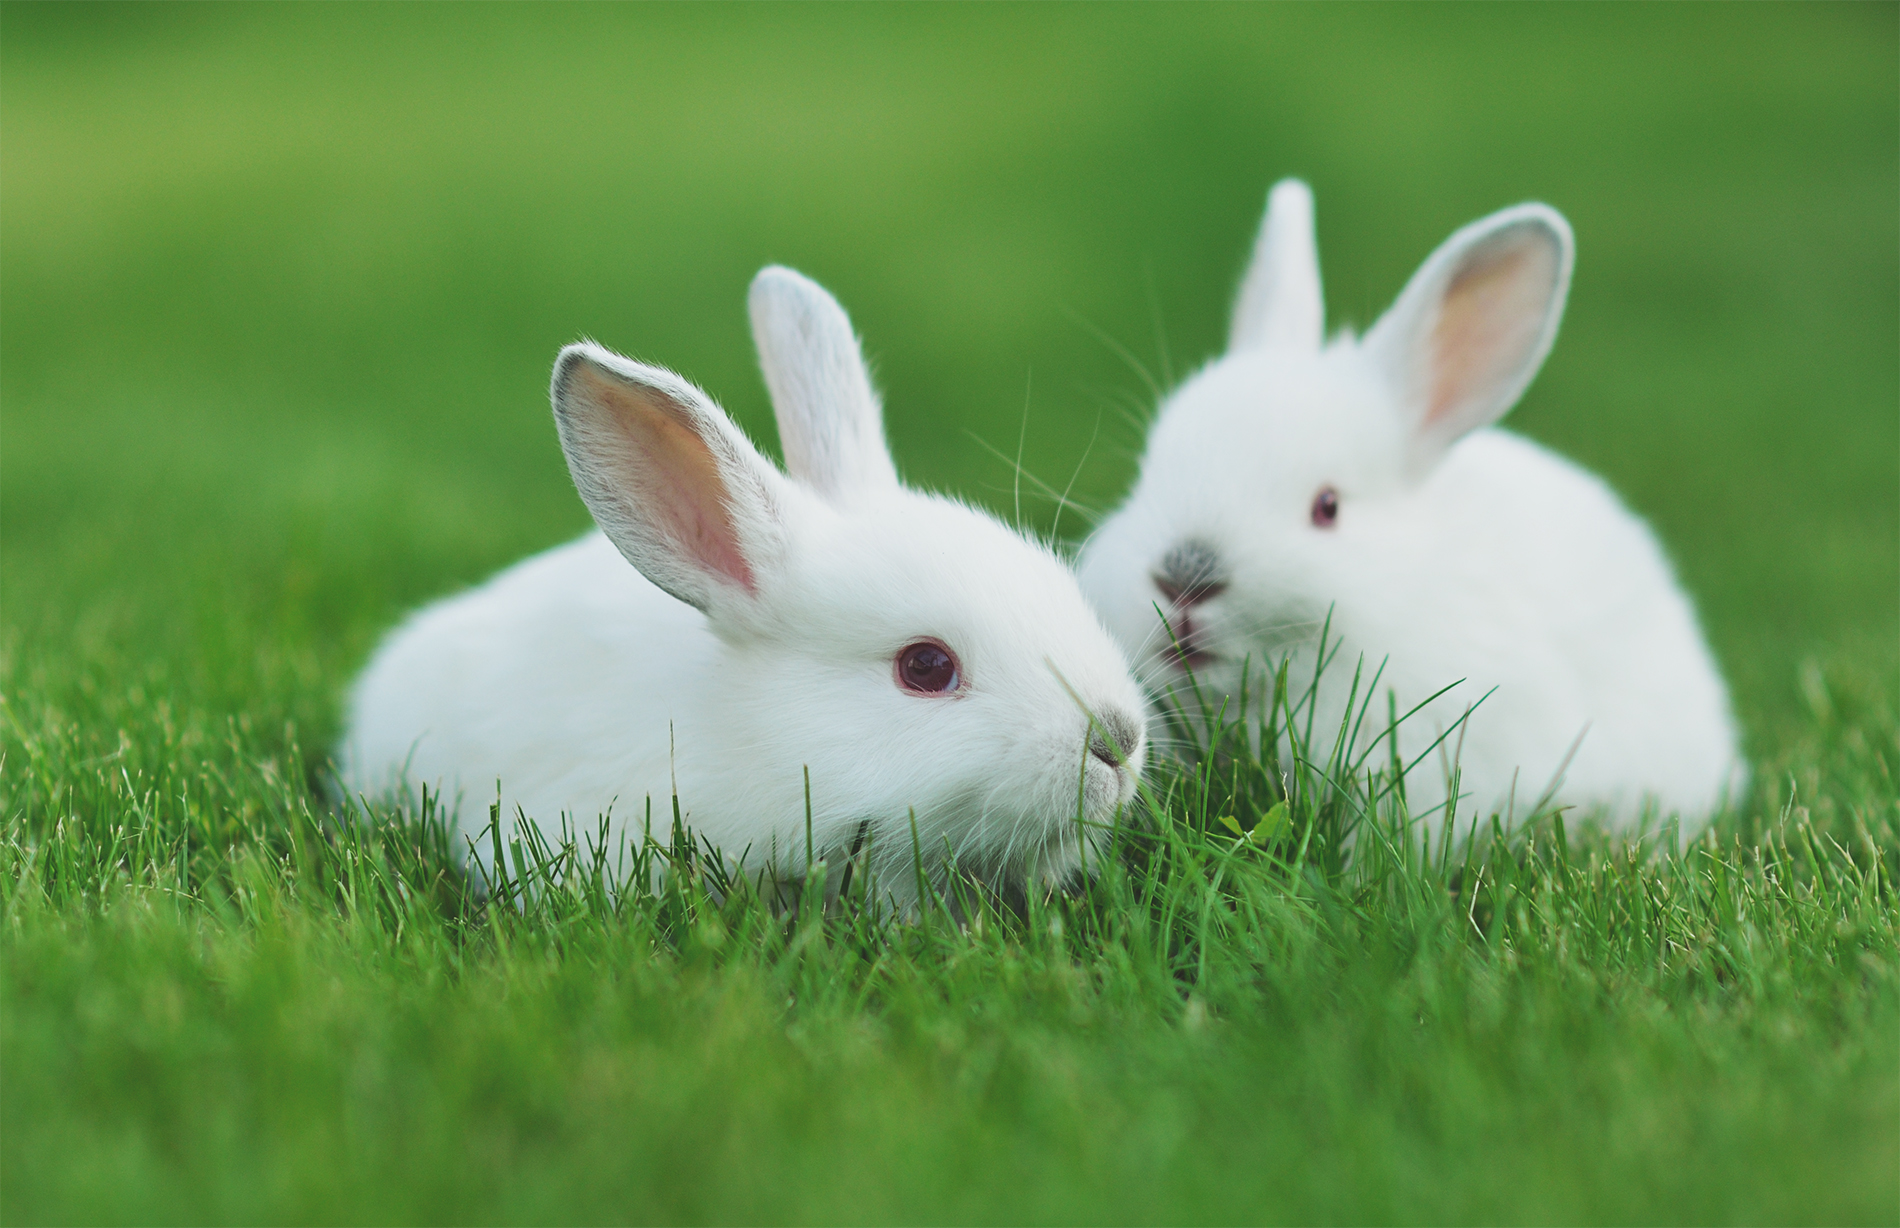 Image shows two rabbits in field